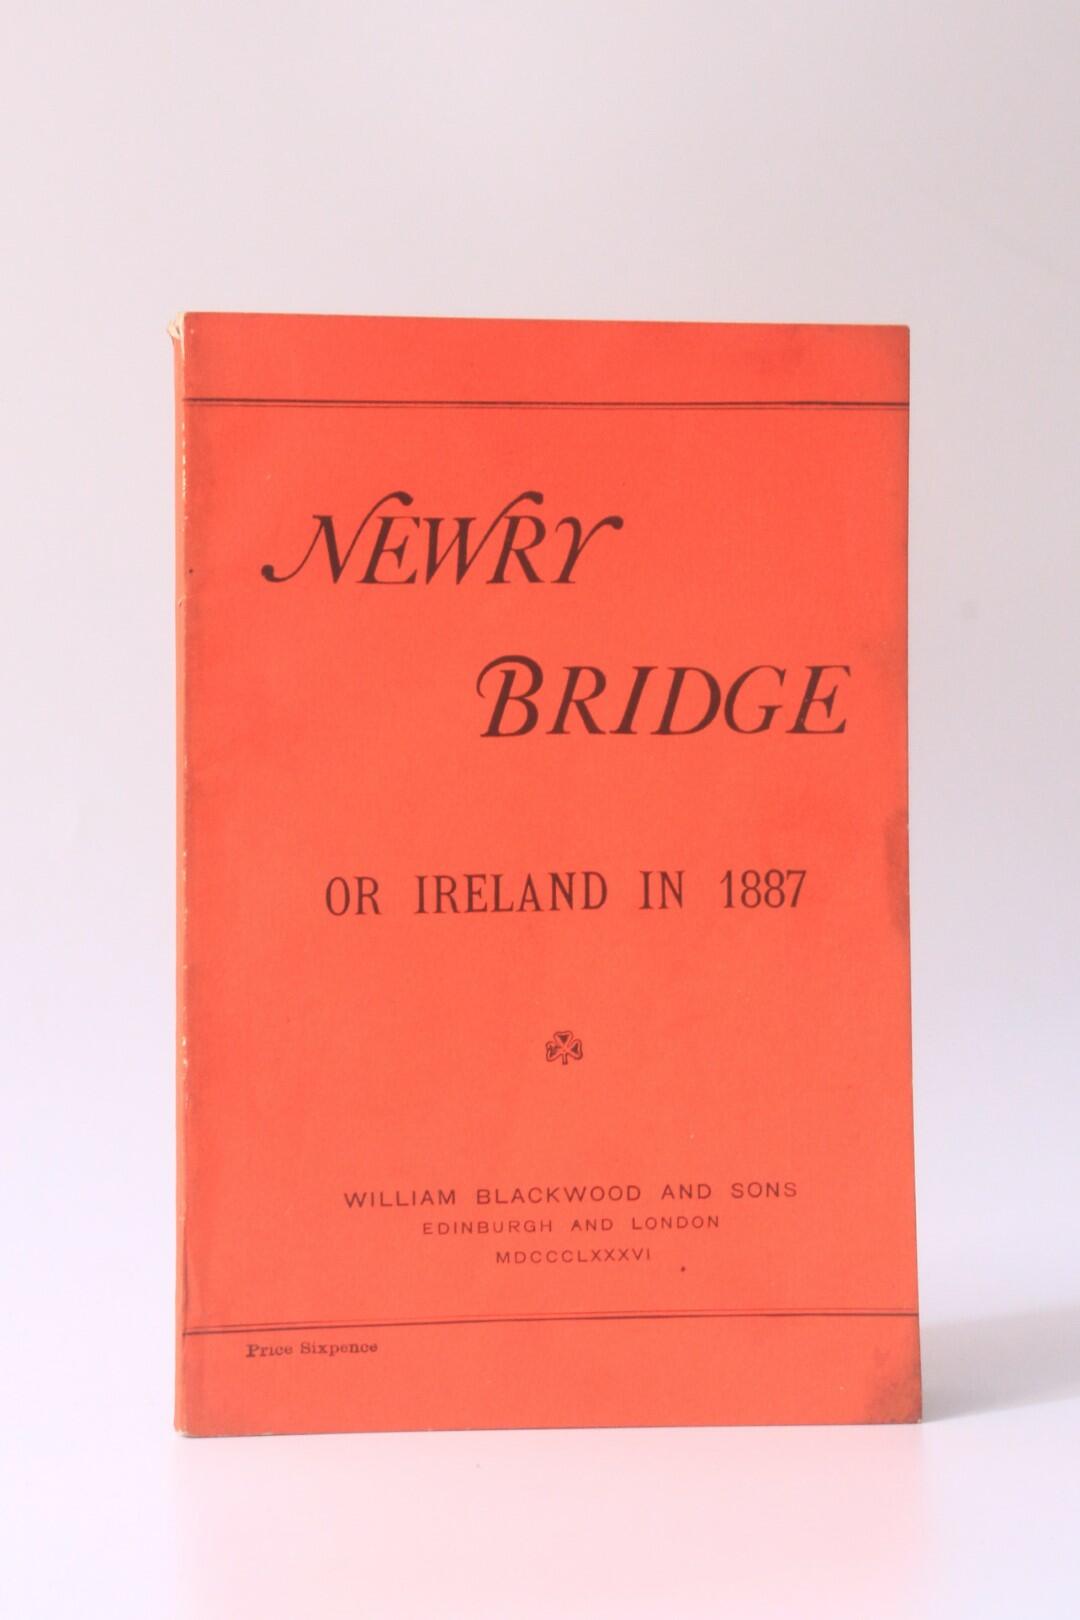 Anonymous - Newry Bridge or Ireland in 1887 - William Blackwood, 1886, First Edition.